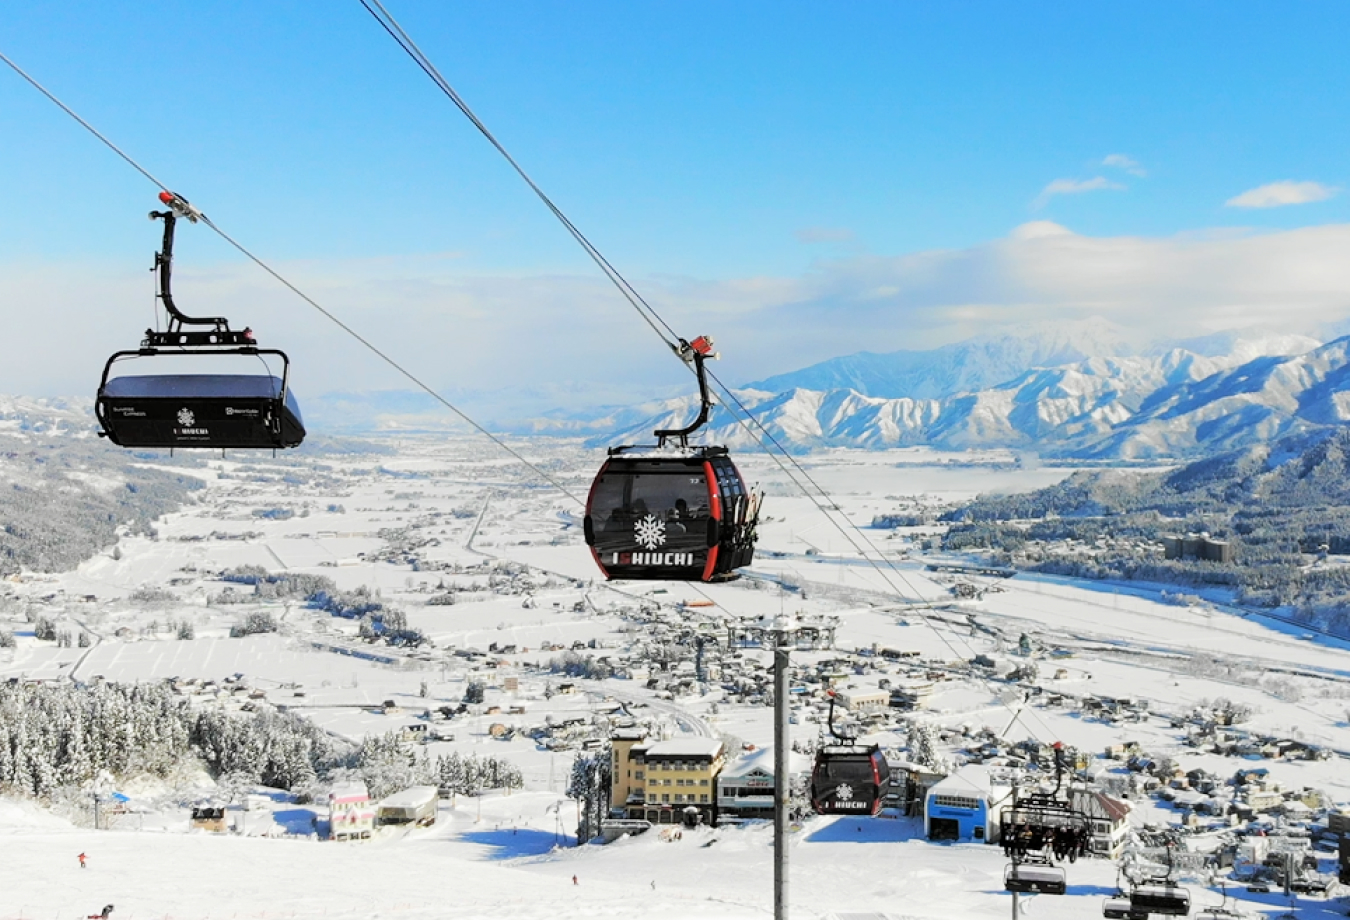 The realization of hybrid transportation meeting diverse user needs, including for skiing and tourism